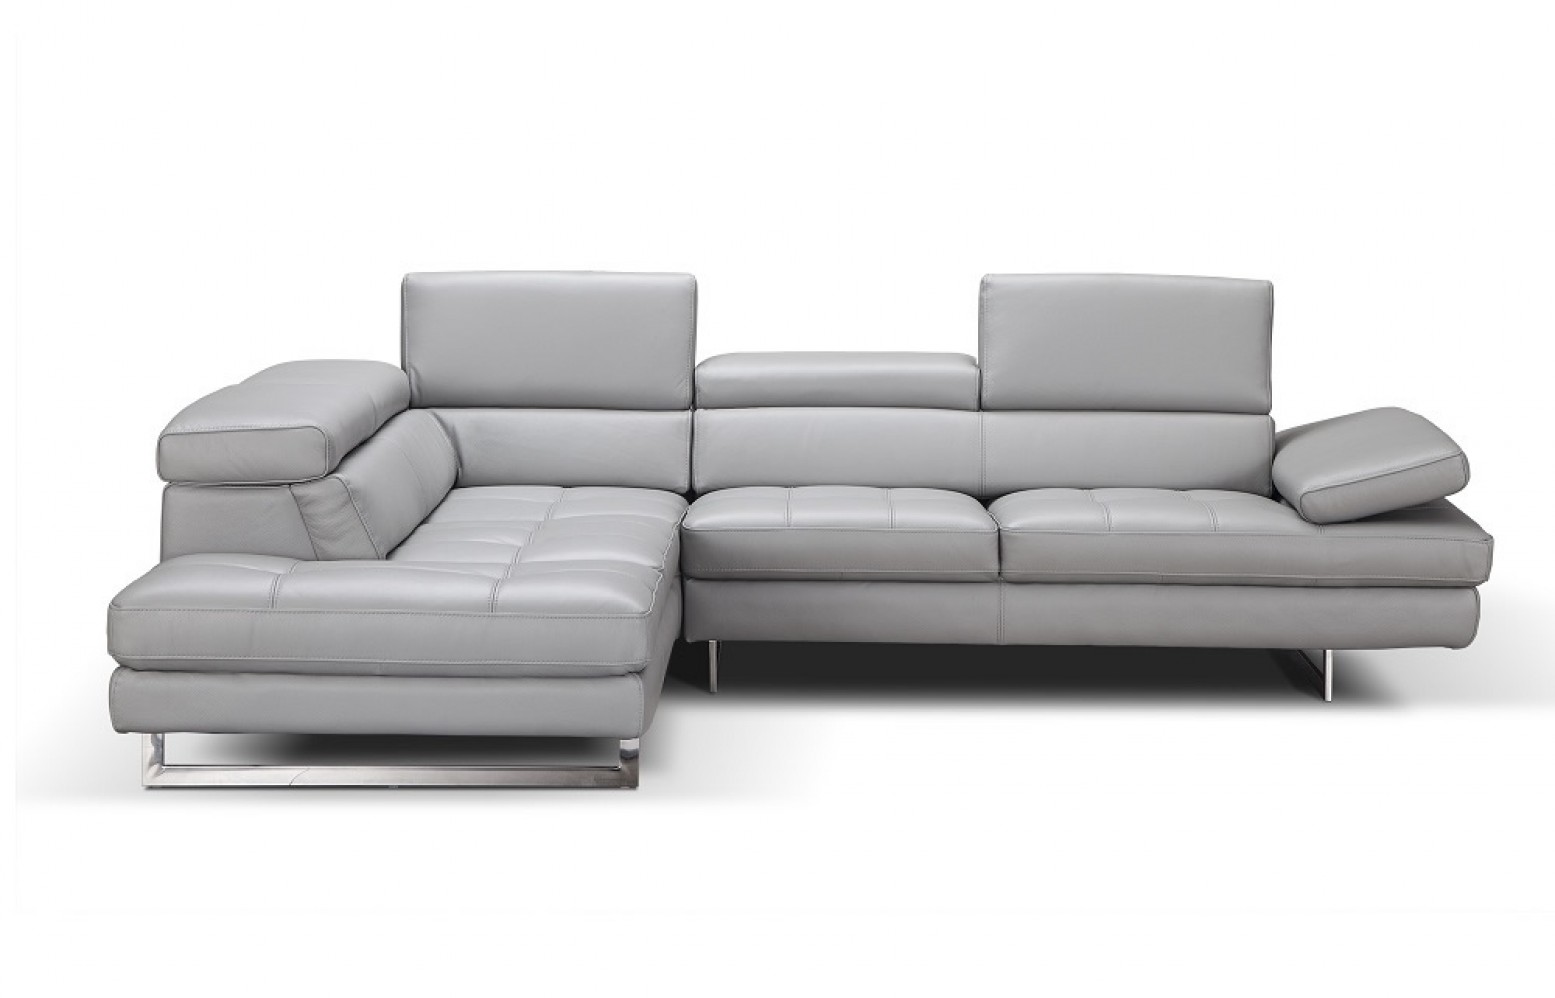 Aurora Italian Leather Sectional Left, Light Grey Leather Sectional With Chaise